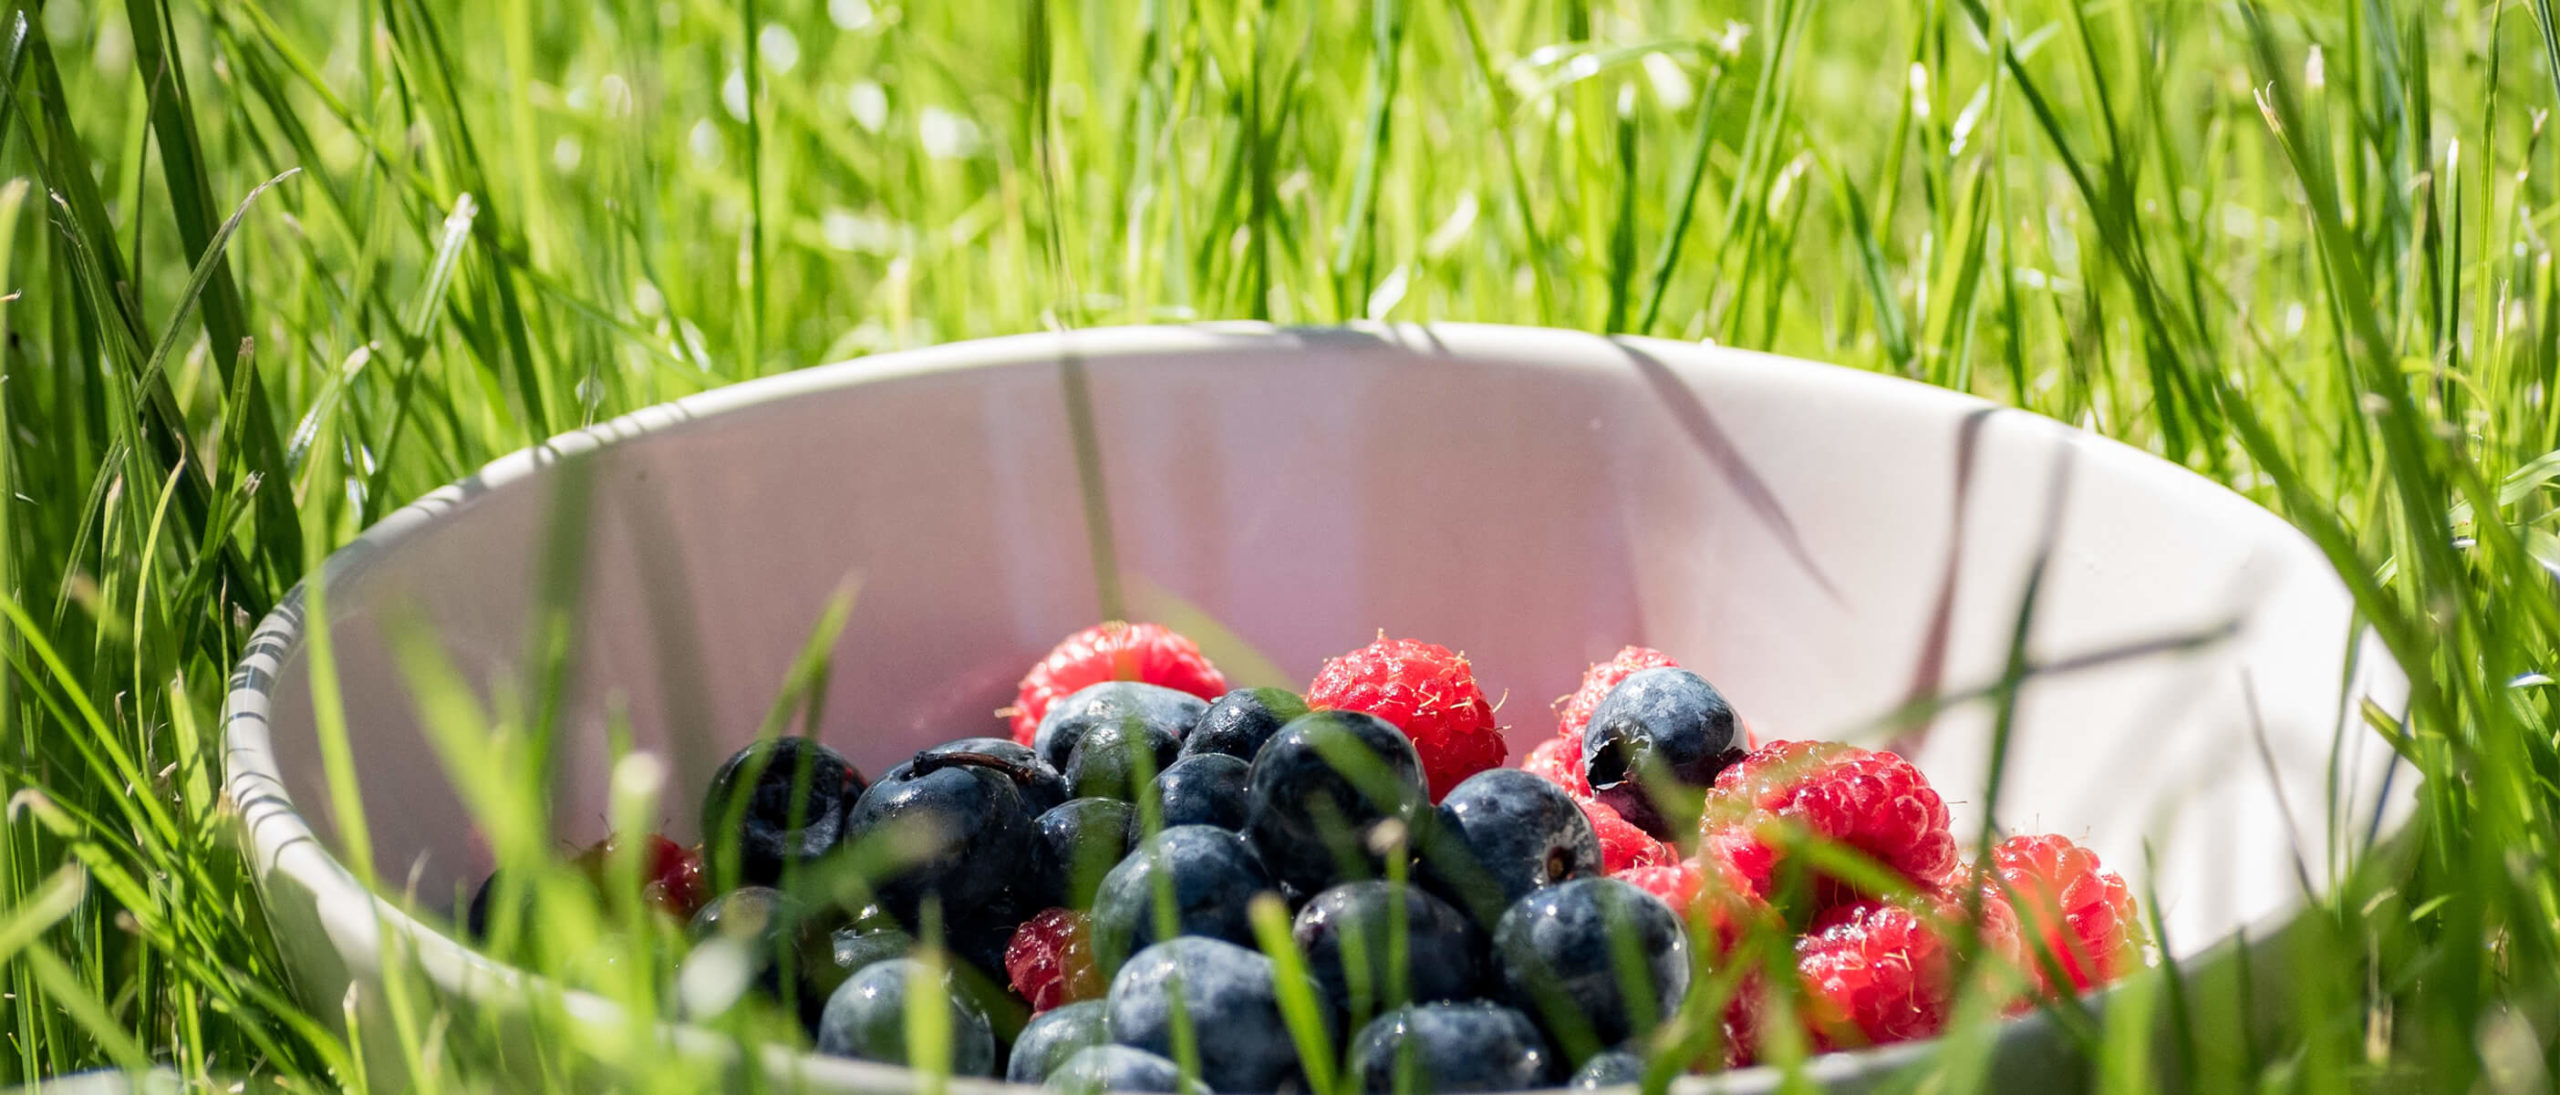 Have a Berry Good Summer With These Delicious Recipes